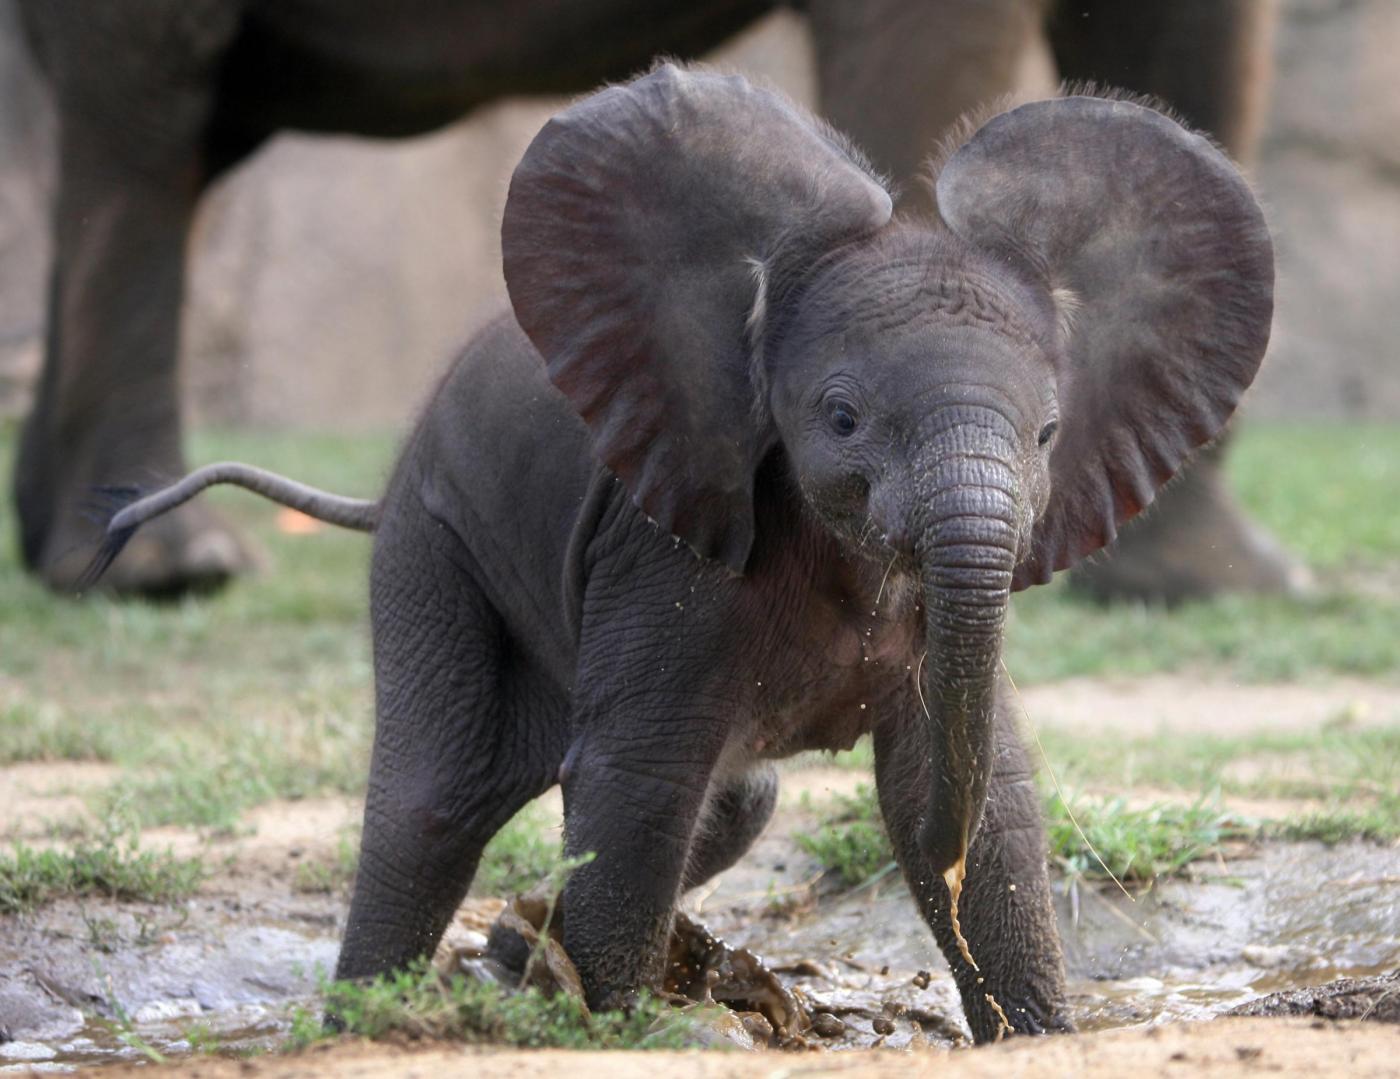 Baby elephant playing in a puddle